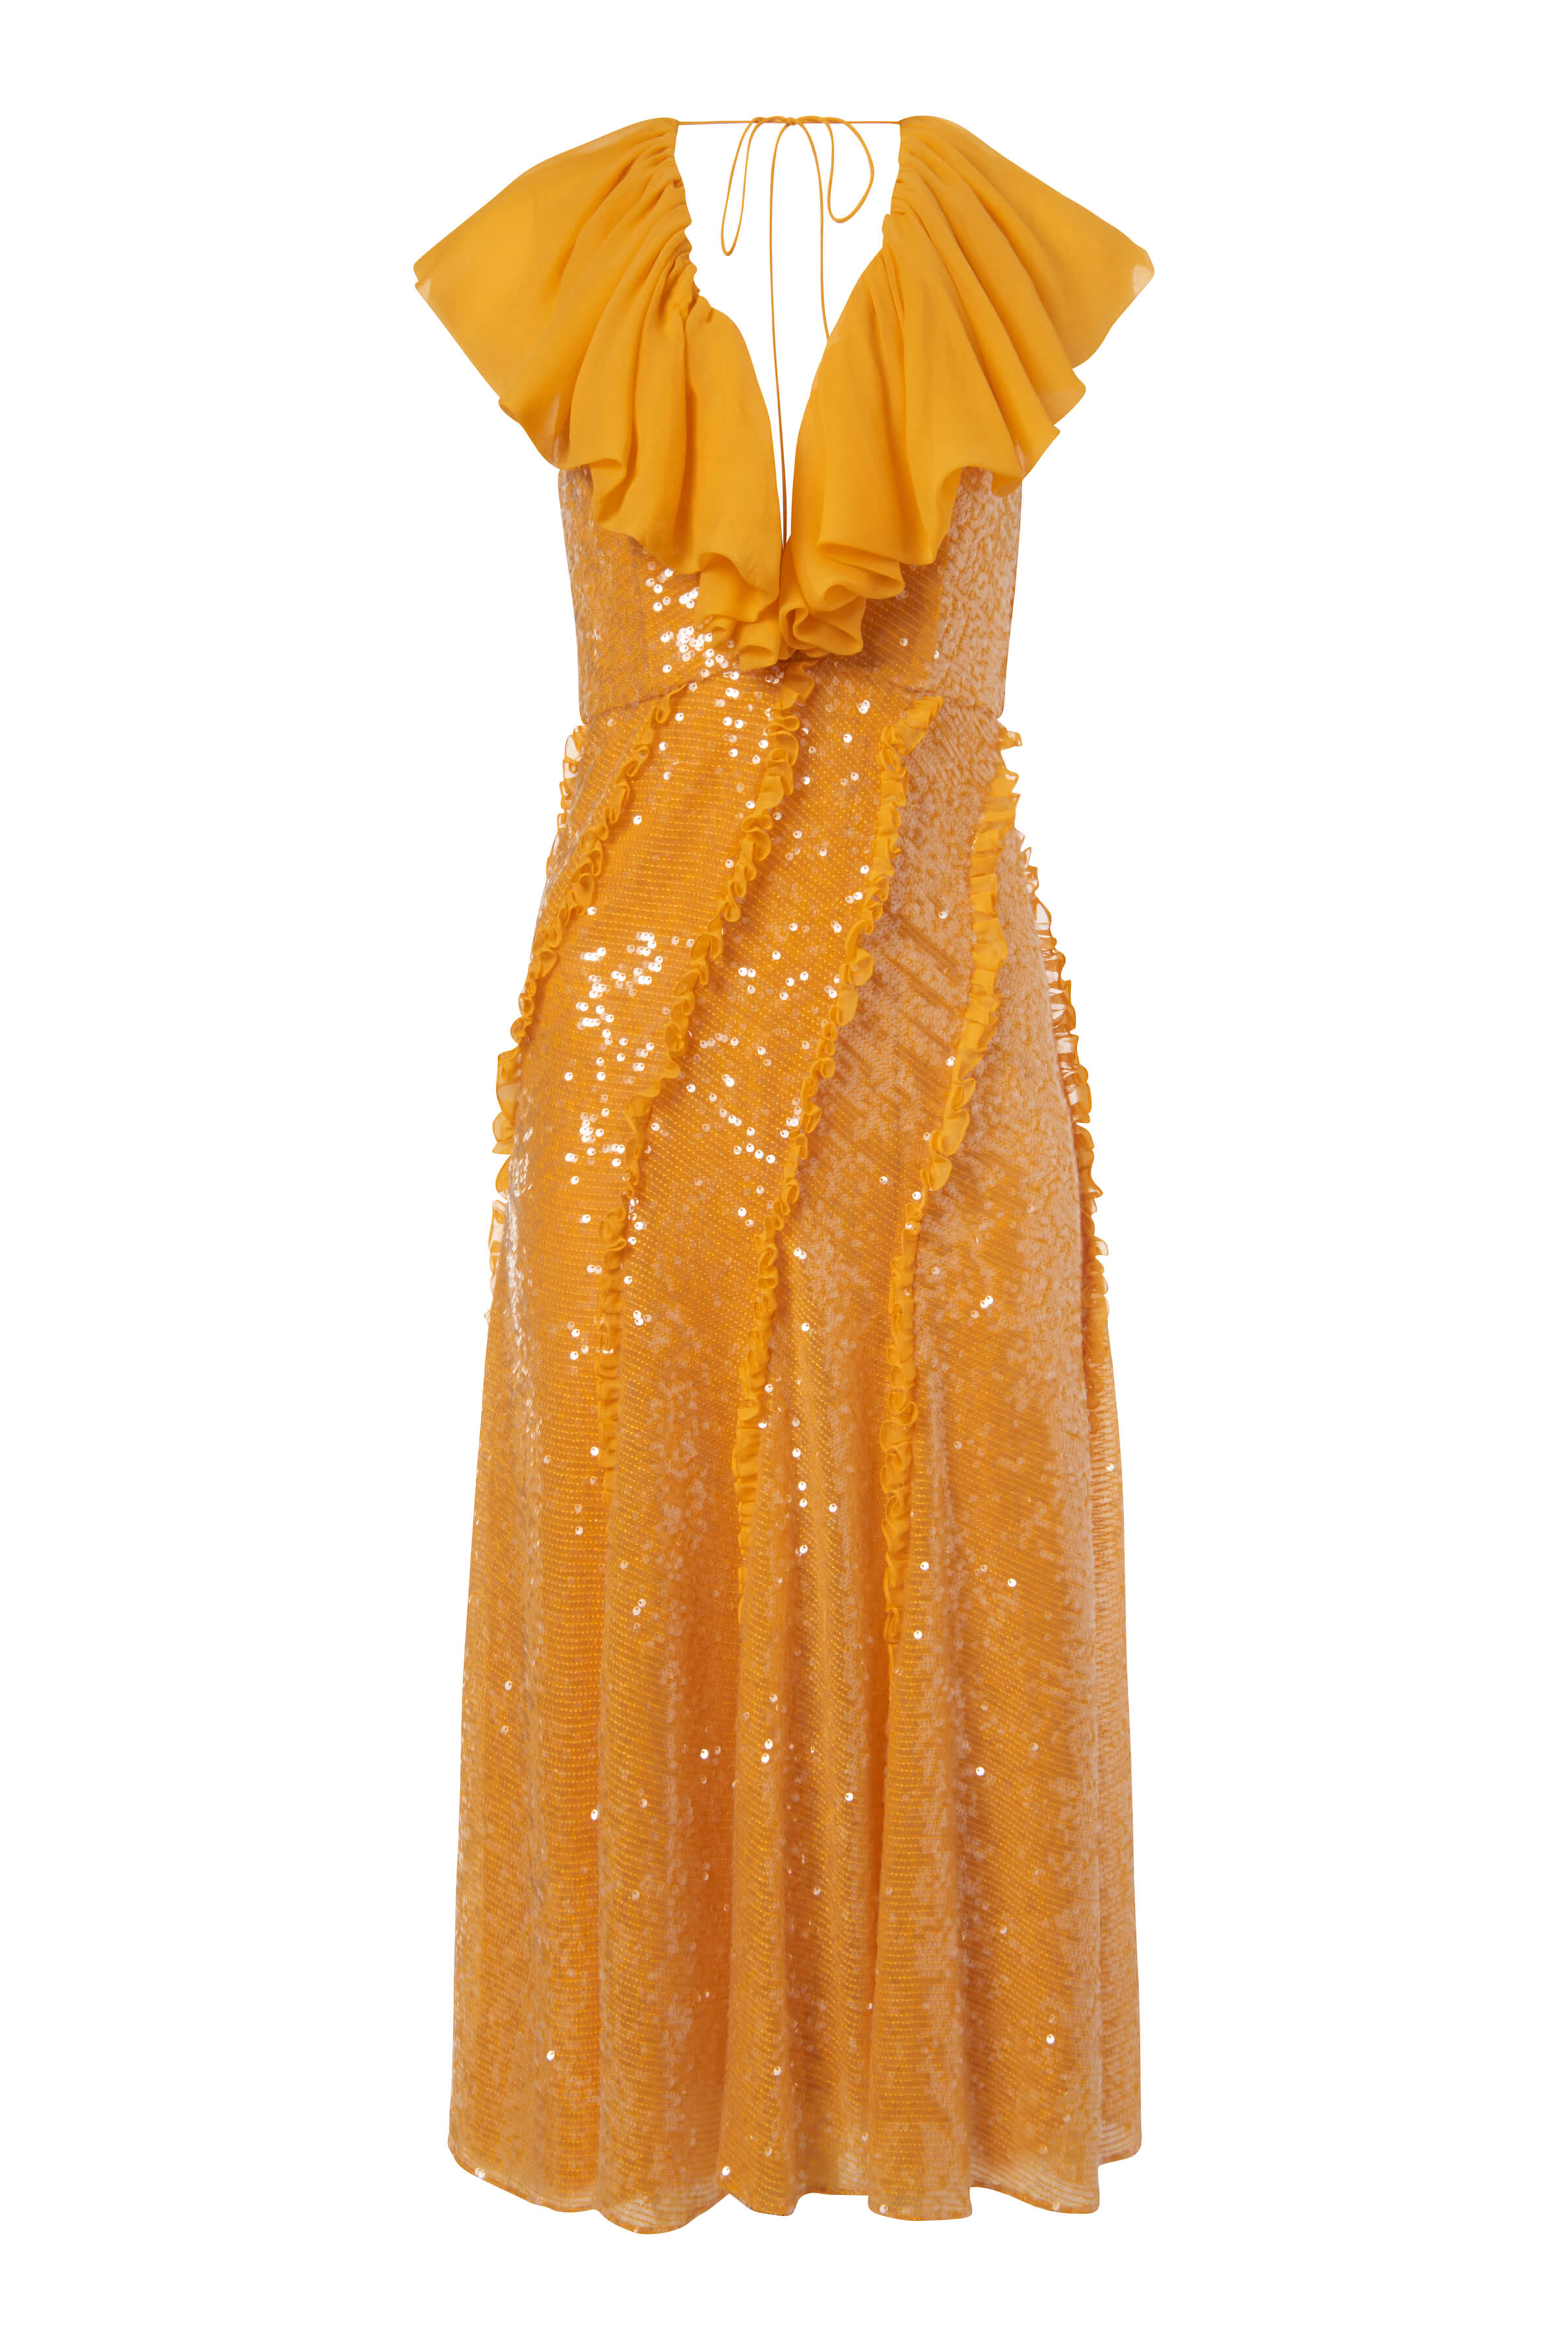 Victoria Saffron Sequin Midi Dress With Chiffon Ruffle Sleeves And Godets